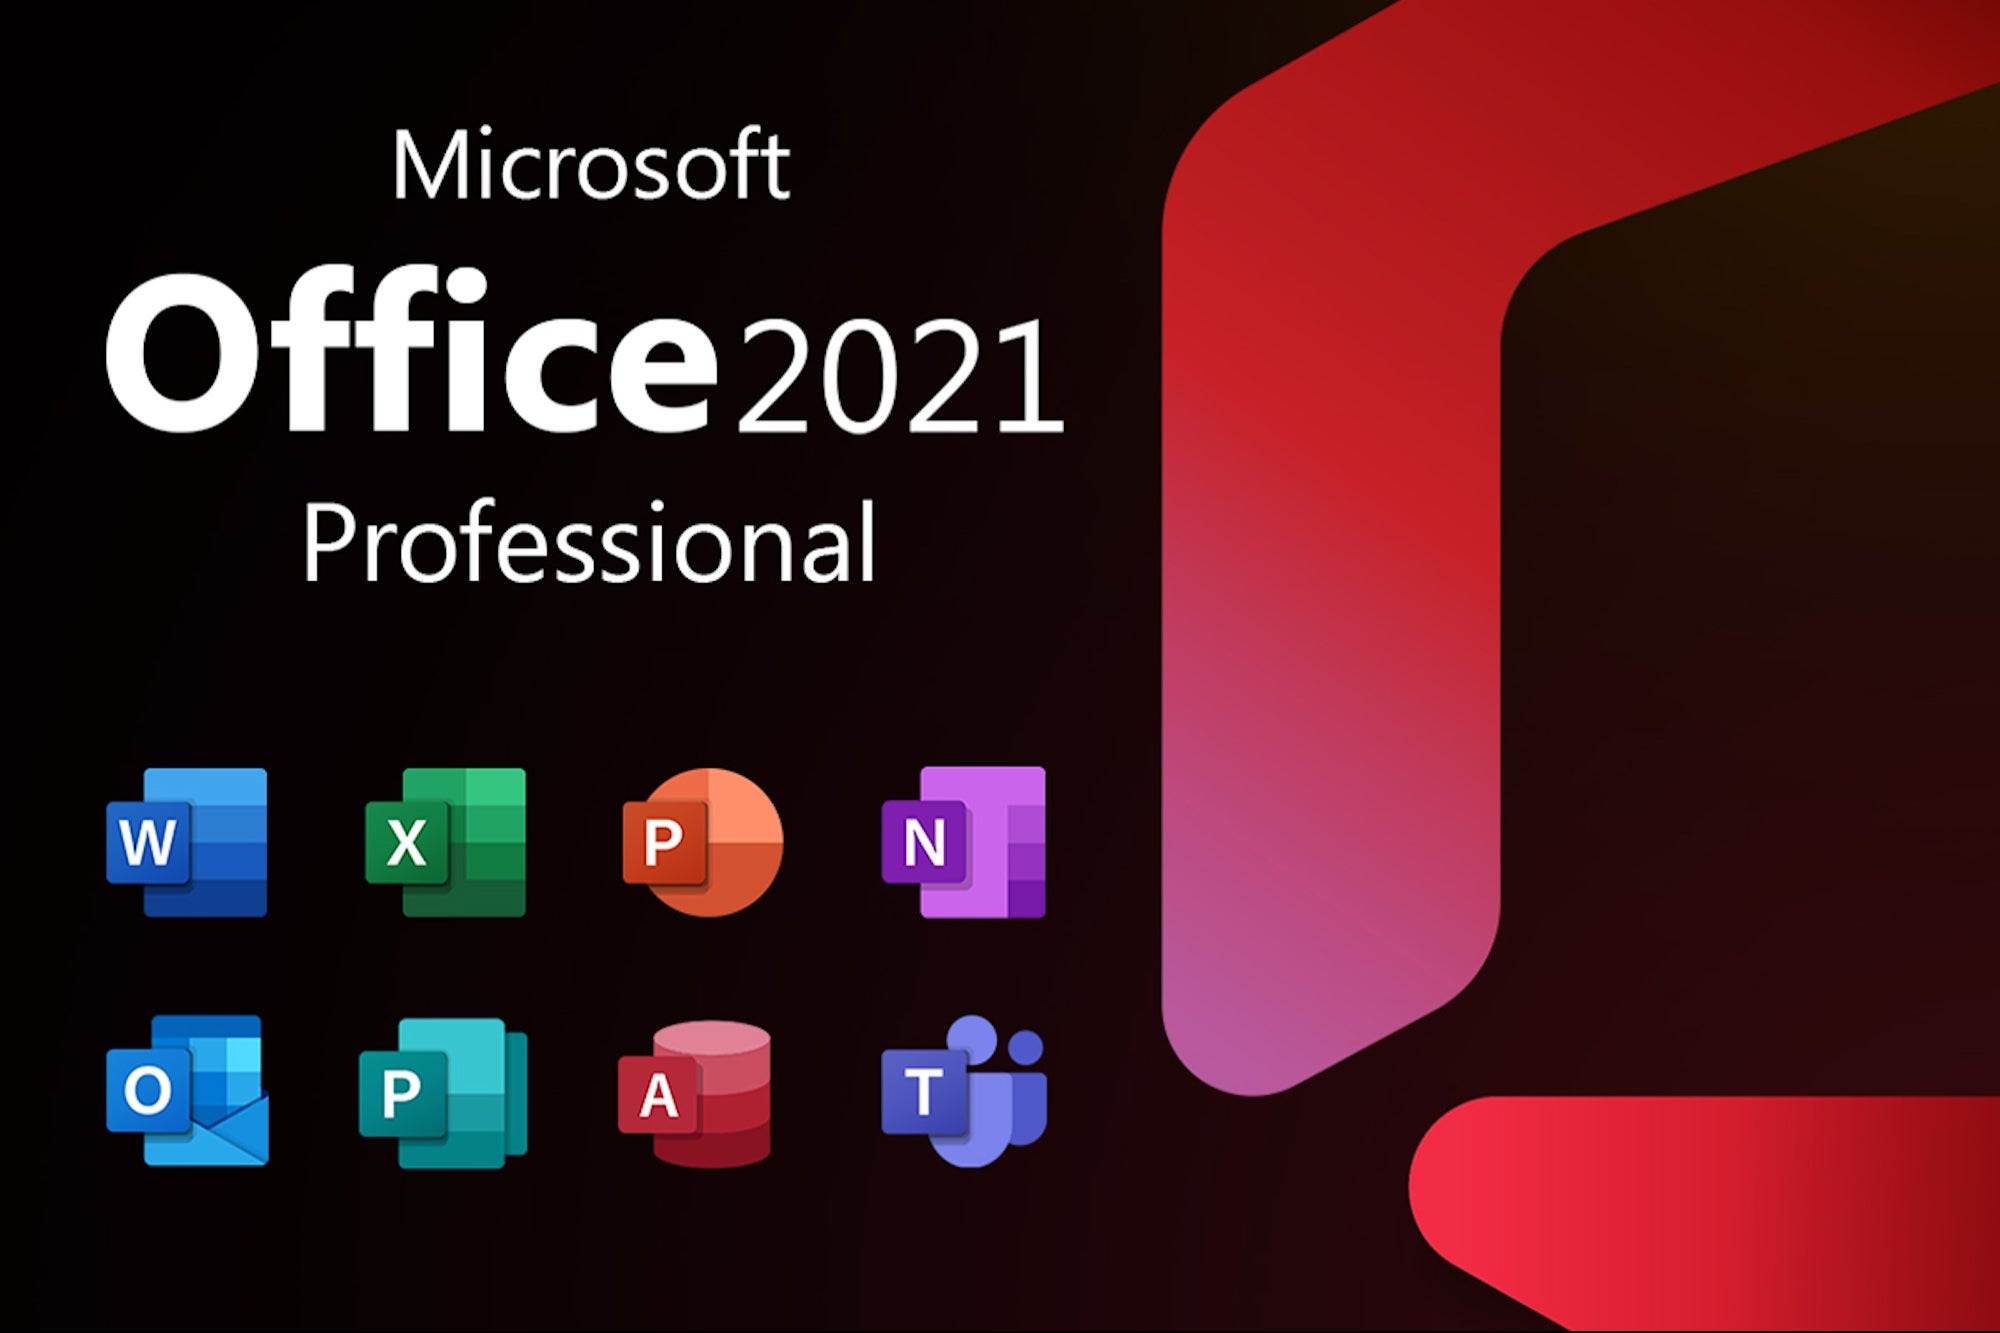 Get Microsoft Office for Just $30 during this one day sale